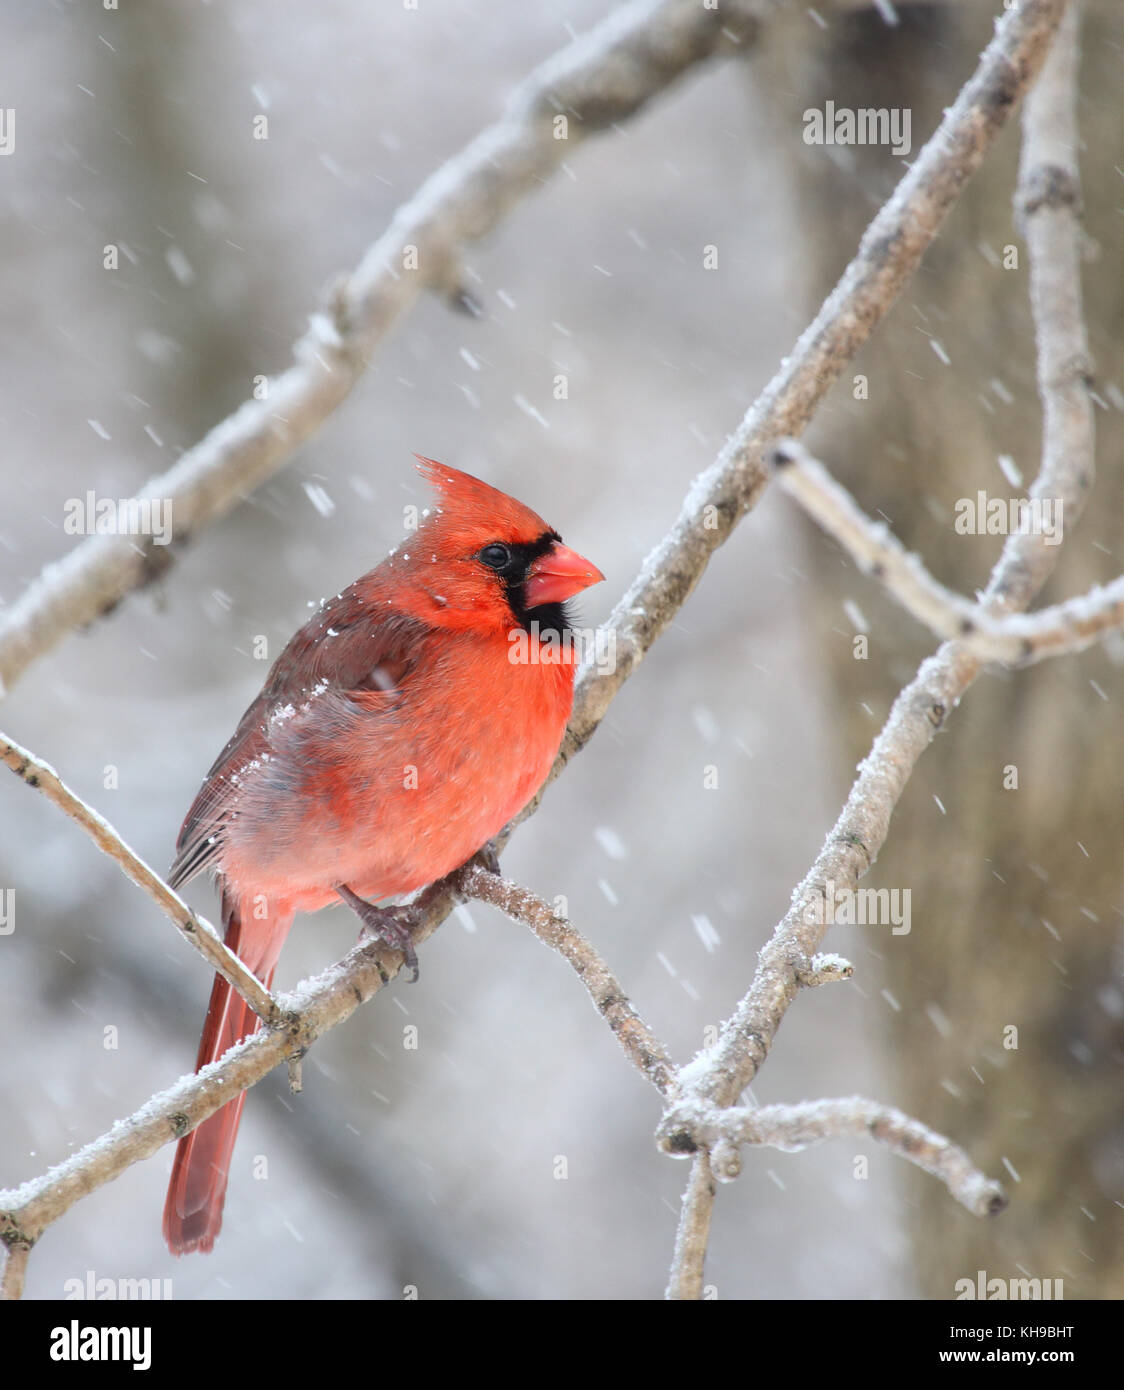 Male northern cardinal, Cardinalis cardinalis perched on a tree branch with snow Stock Photo